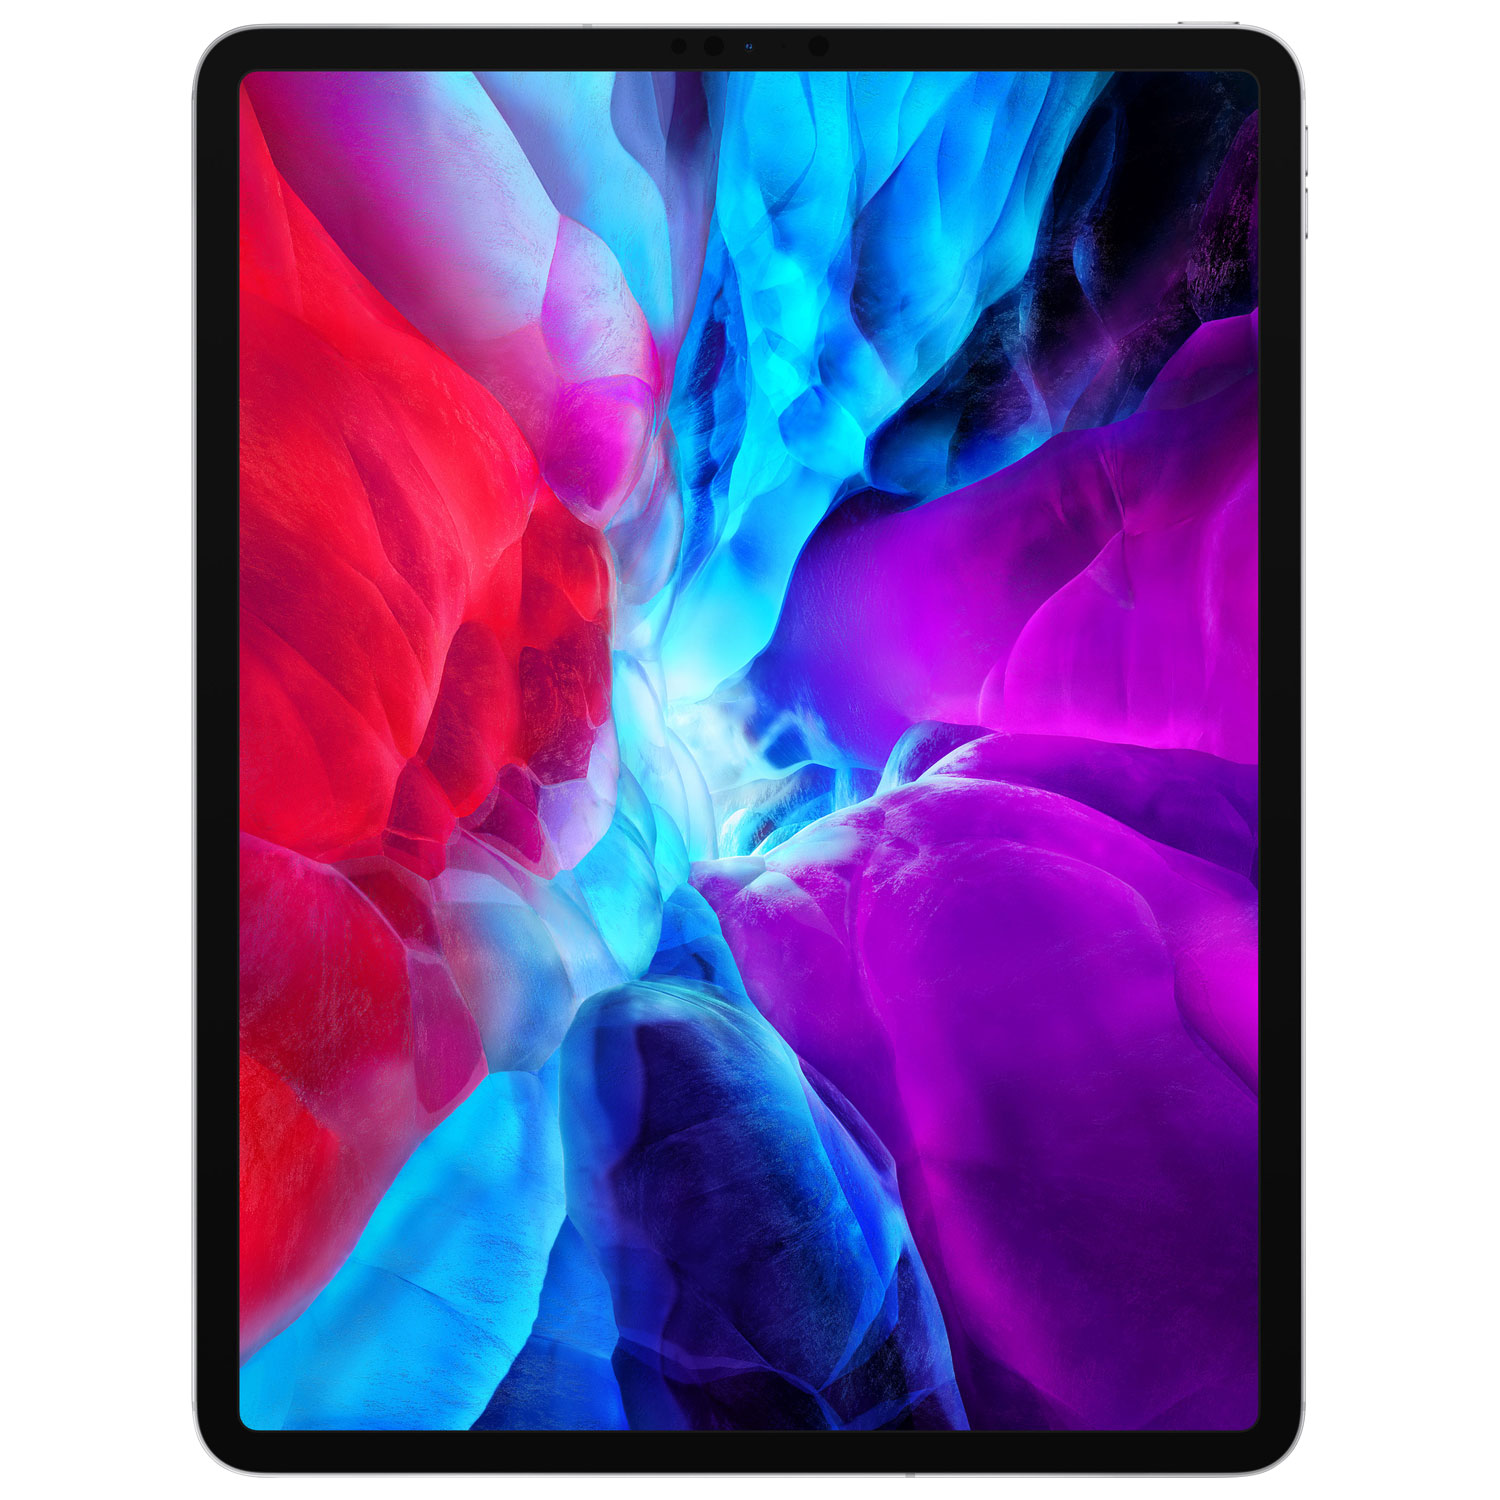 Bell Apple iPad Pro 12.9 128GB with Wi-Fi u0026 4G LTE (4th Generation)  -Silver -Monthly Financing | Best Buy Canada